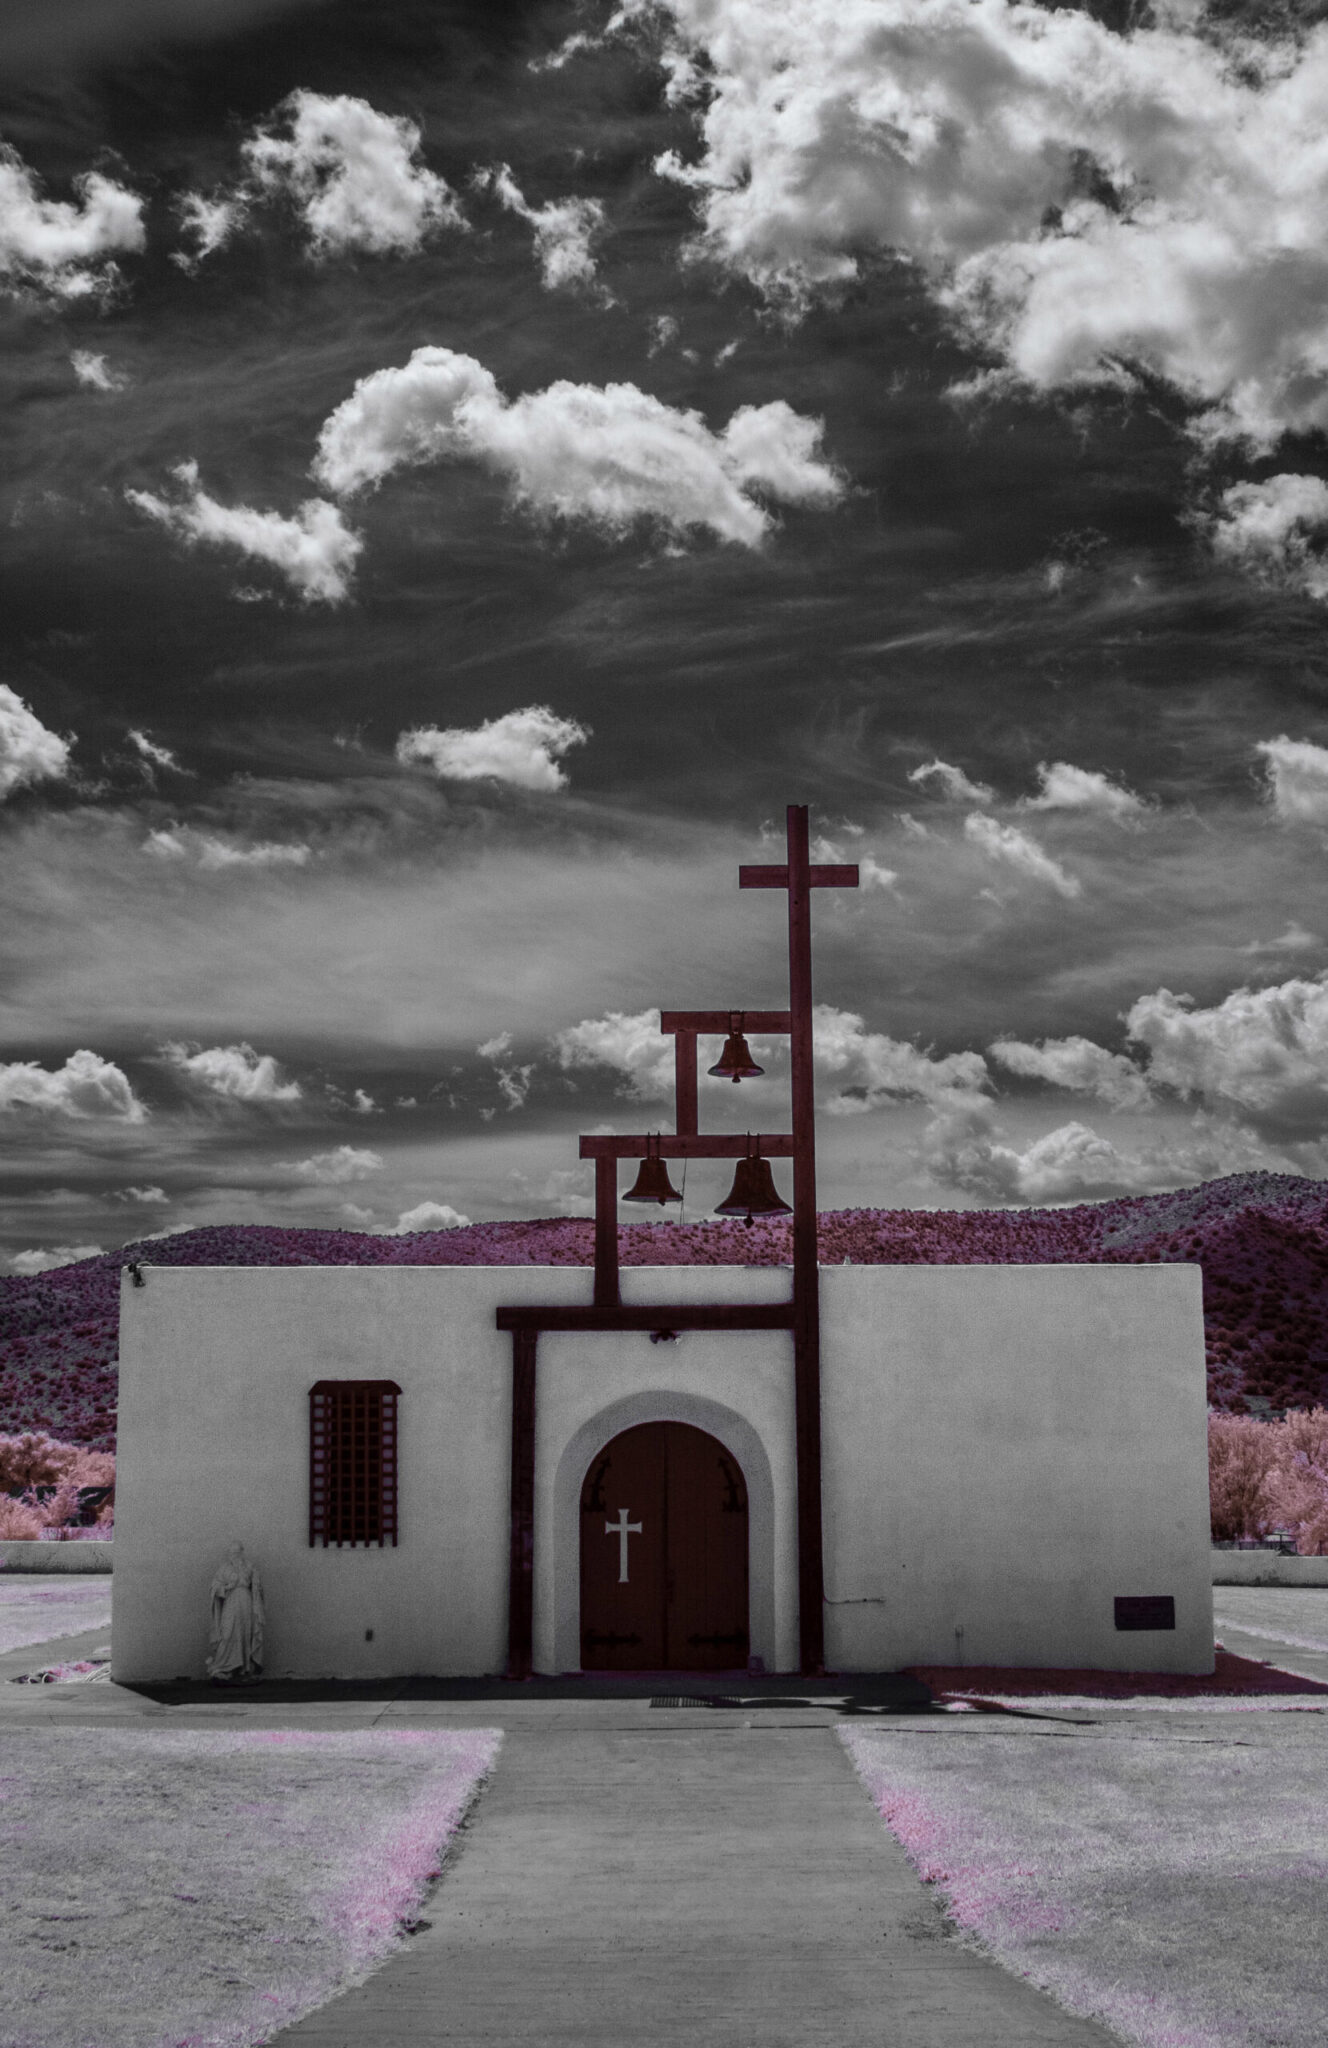 Another Rural New Mexico Church - Patrick Kellys Website